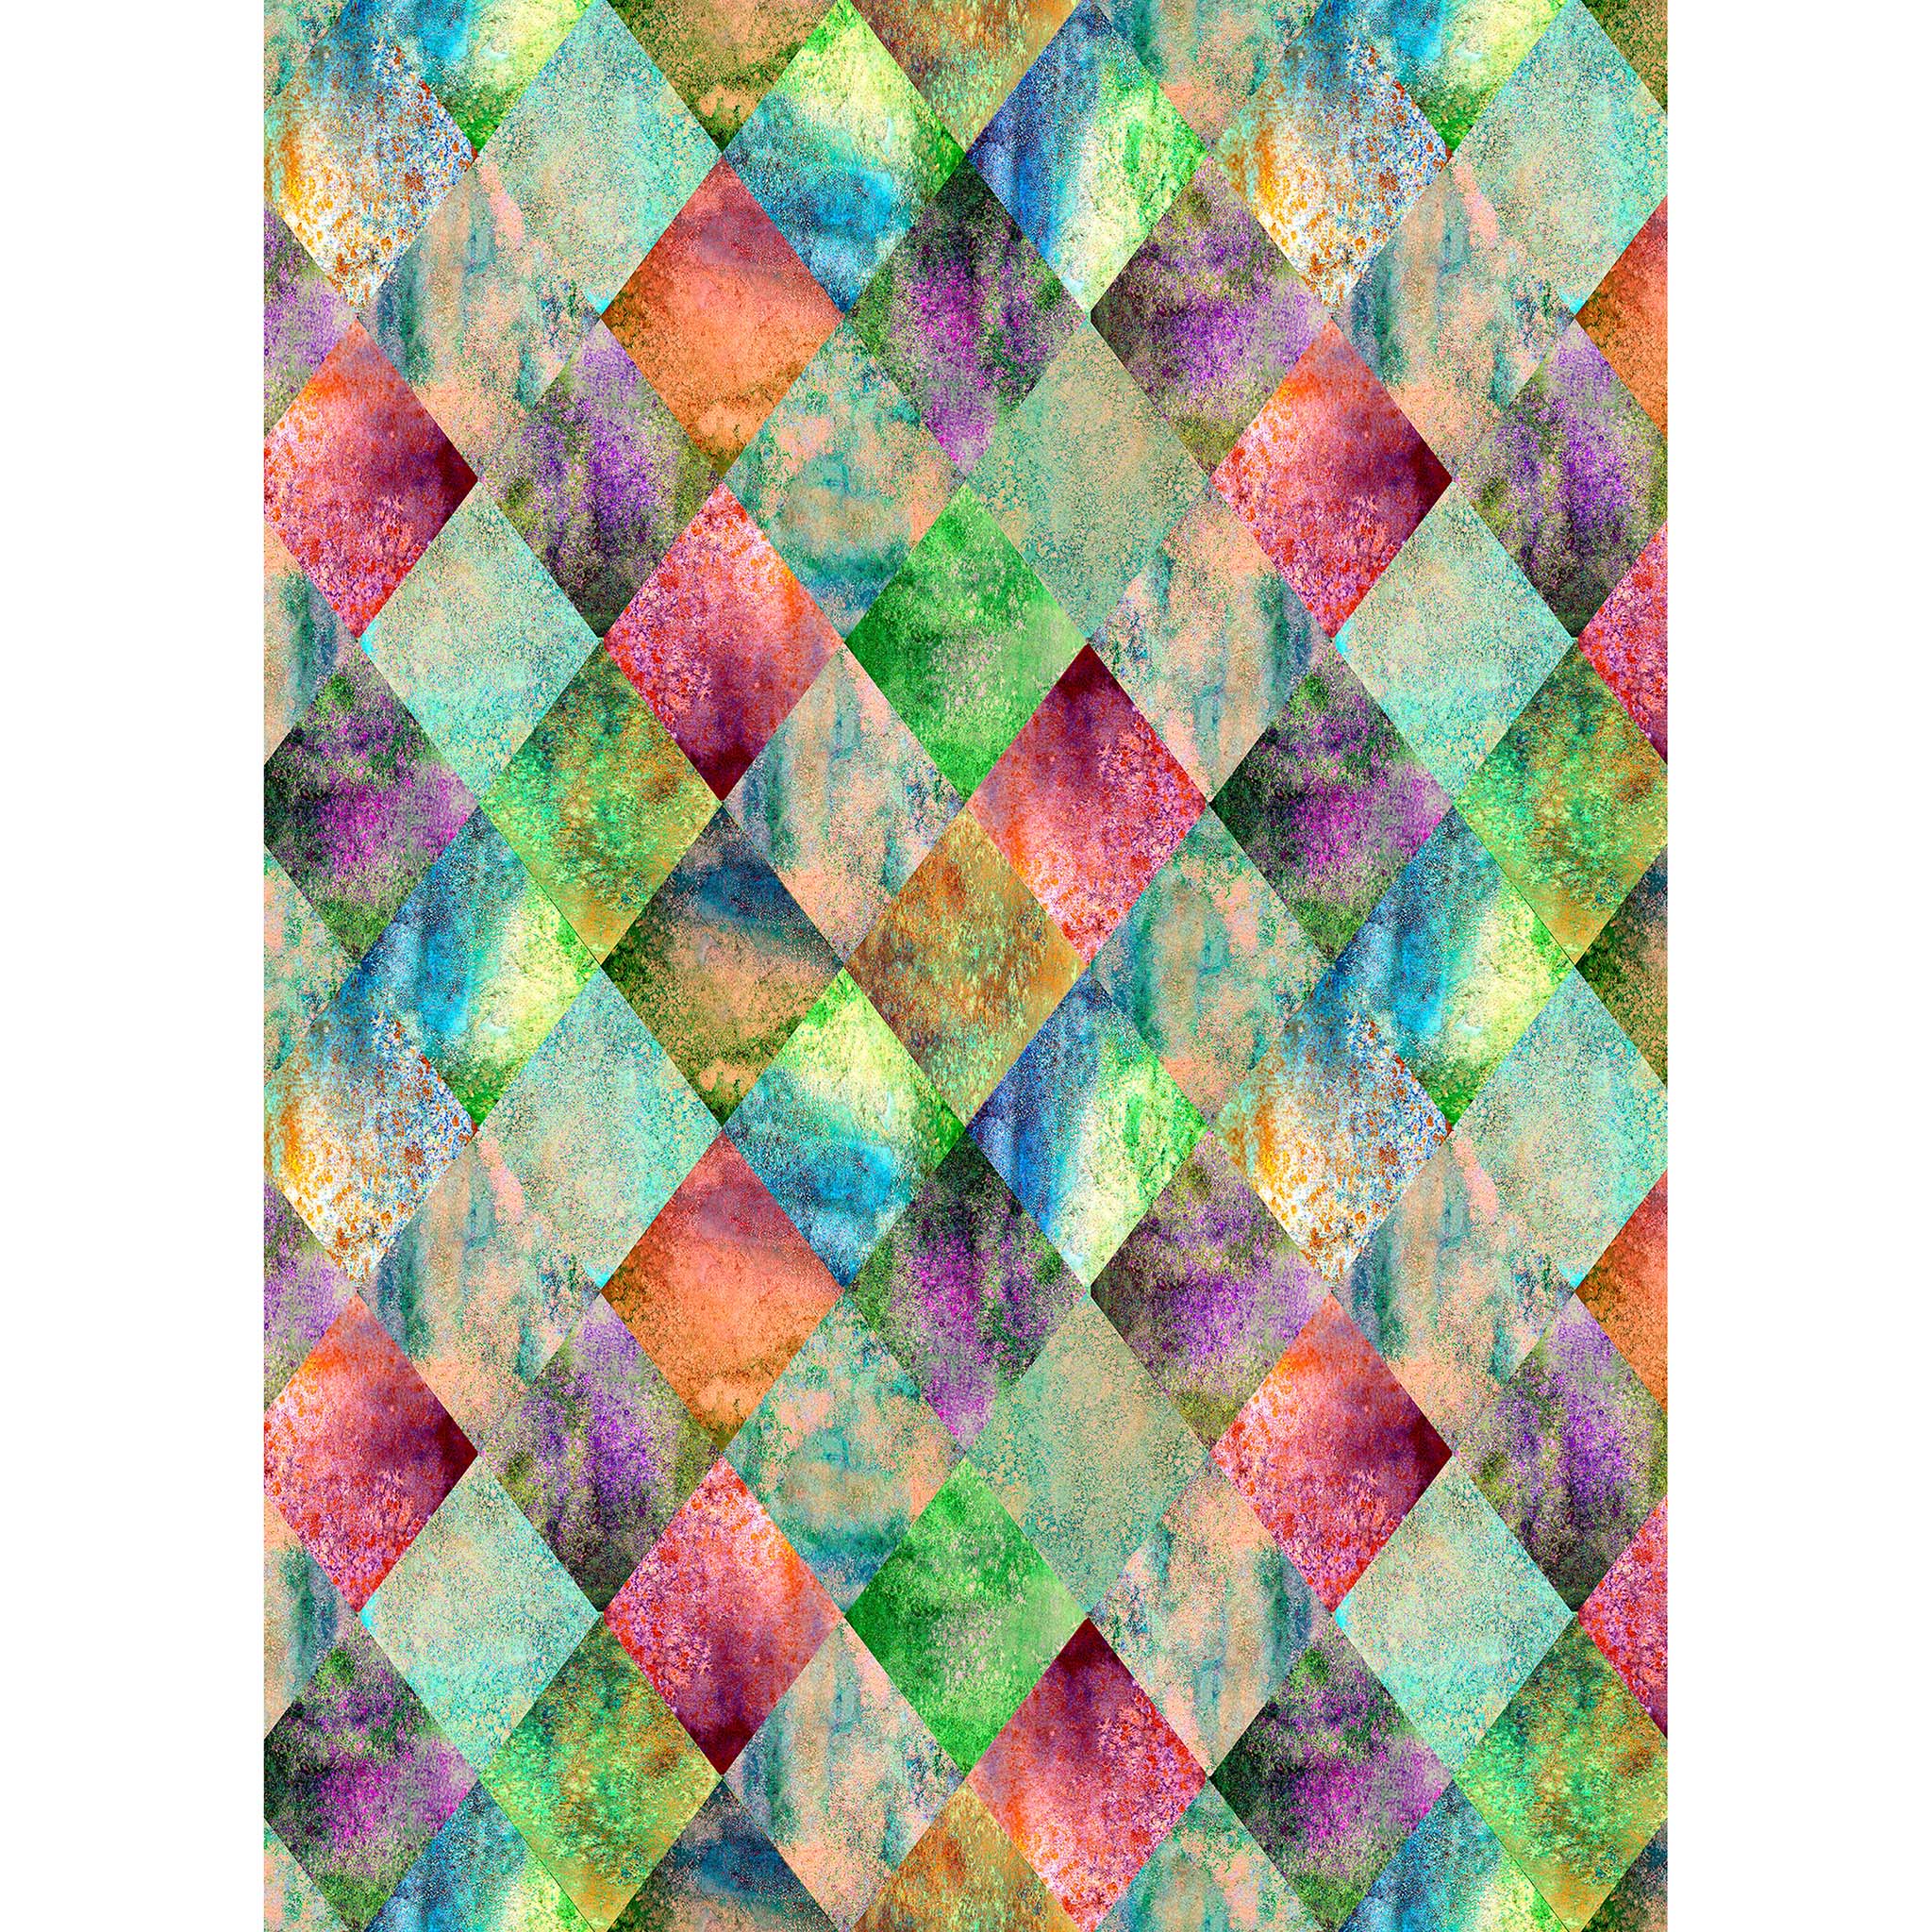 Tissue paper design that features a multicolored watercolor harlequin pattern. White borders are on the sides.